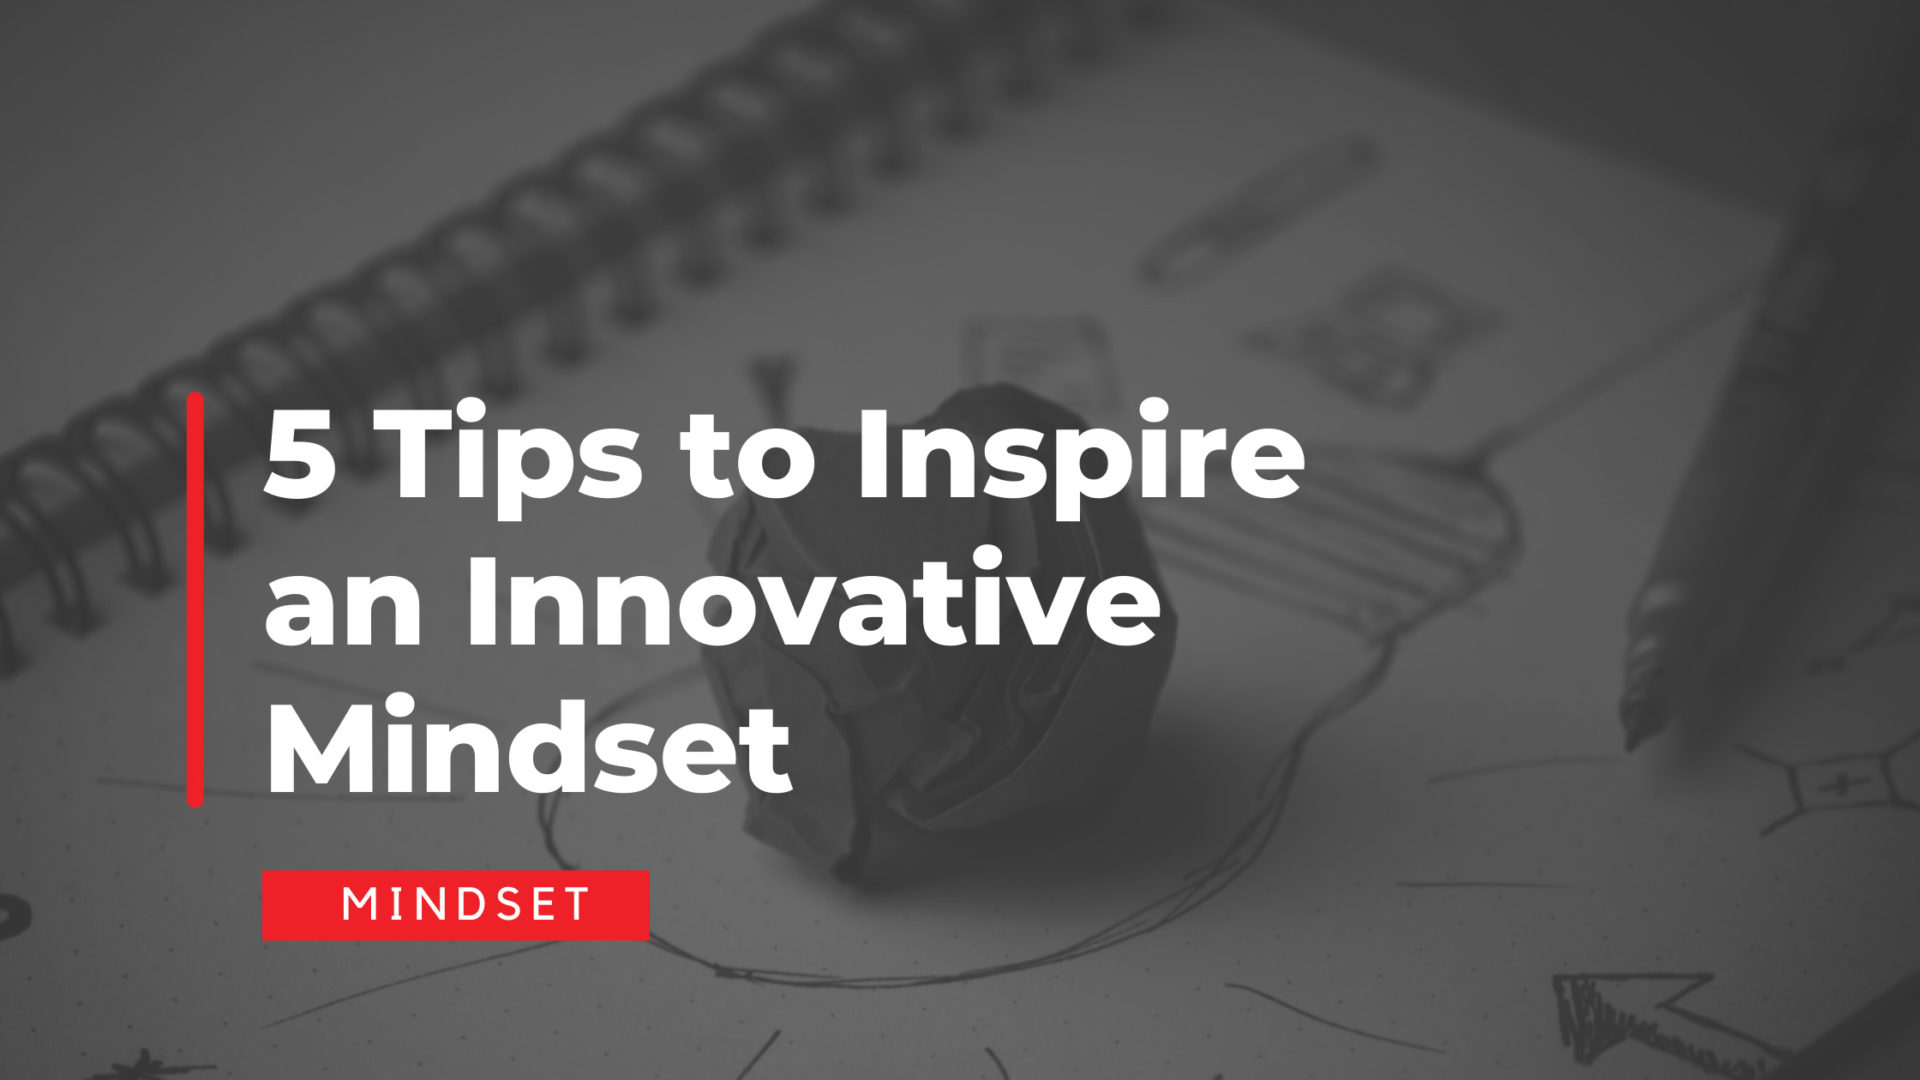 5 Tips to Inspire an Innovative Mindset